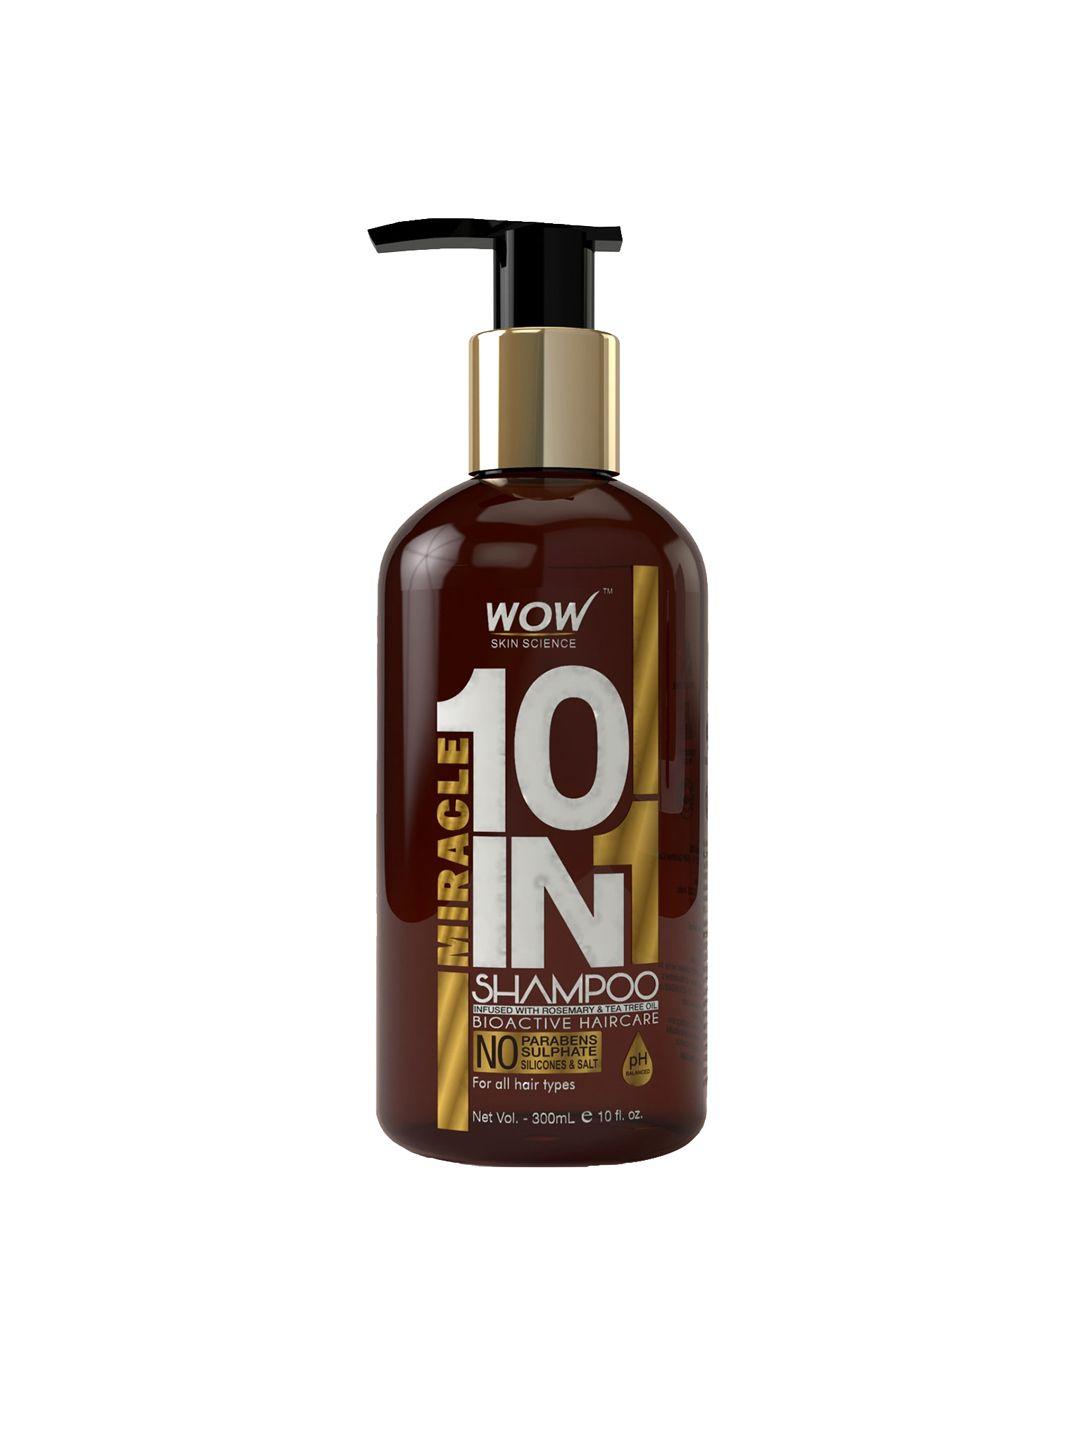 wow skin science miracle 10 in 1 shampoo 300 ml